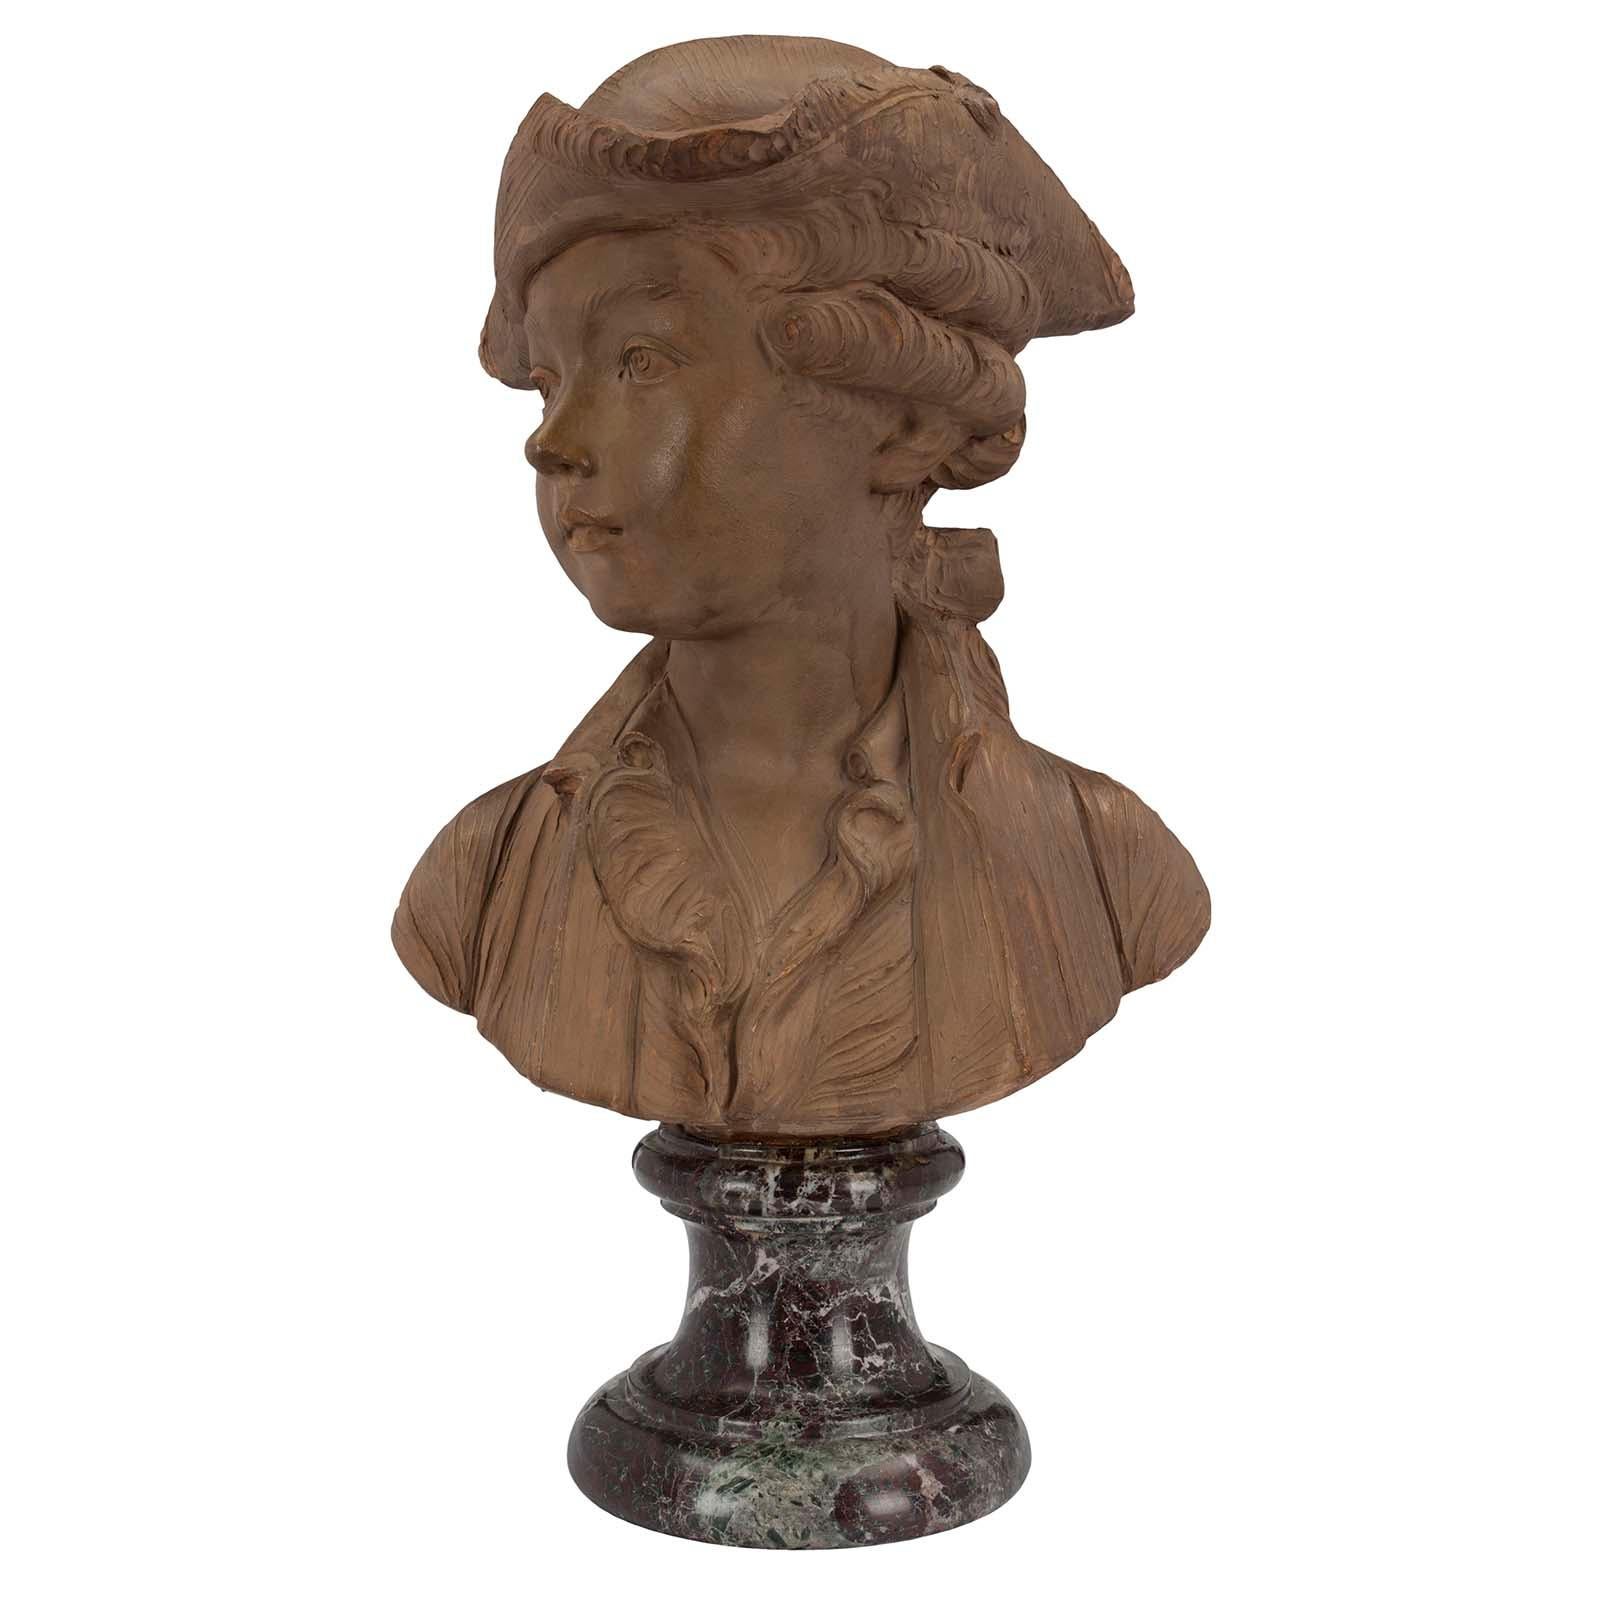 A charming and most decorative French 19th century Louis XVI style terracotta bust of a young boy signed Houdon. The terra cotta bust is raised by an attractive Rosso Levanto circular mottled marble base. Above is the elegant bust of a young boy